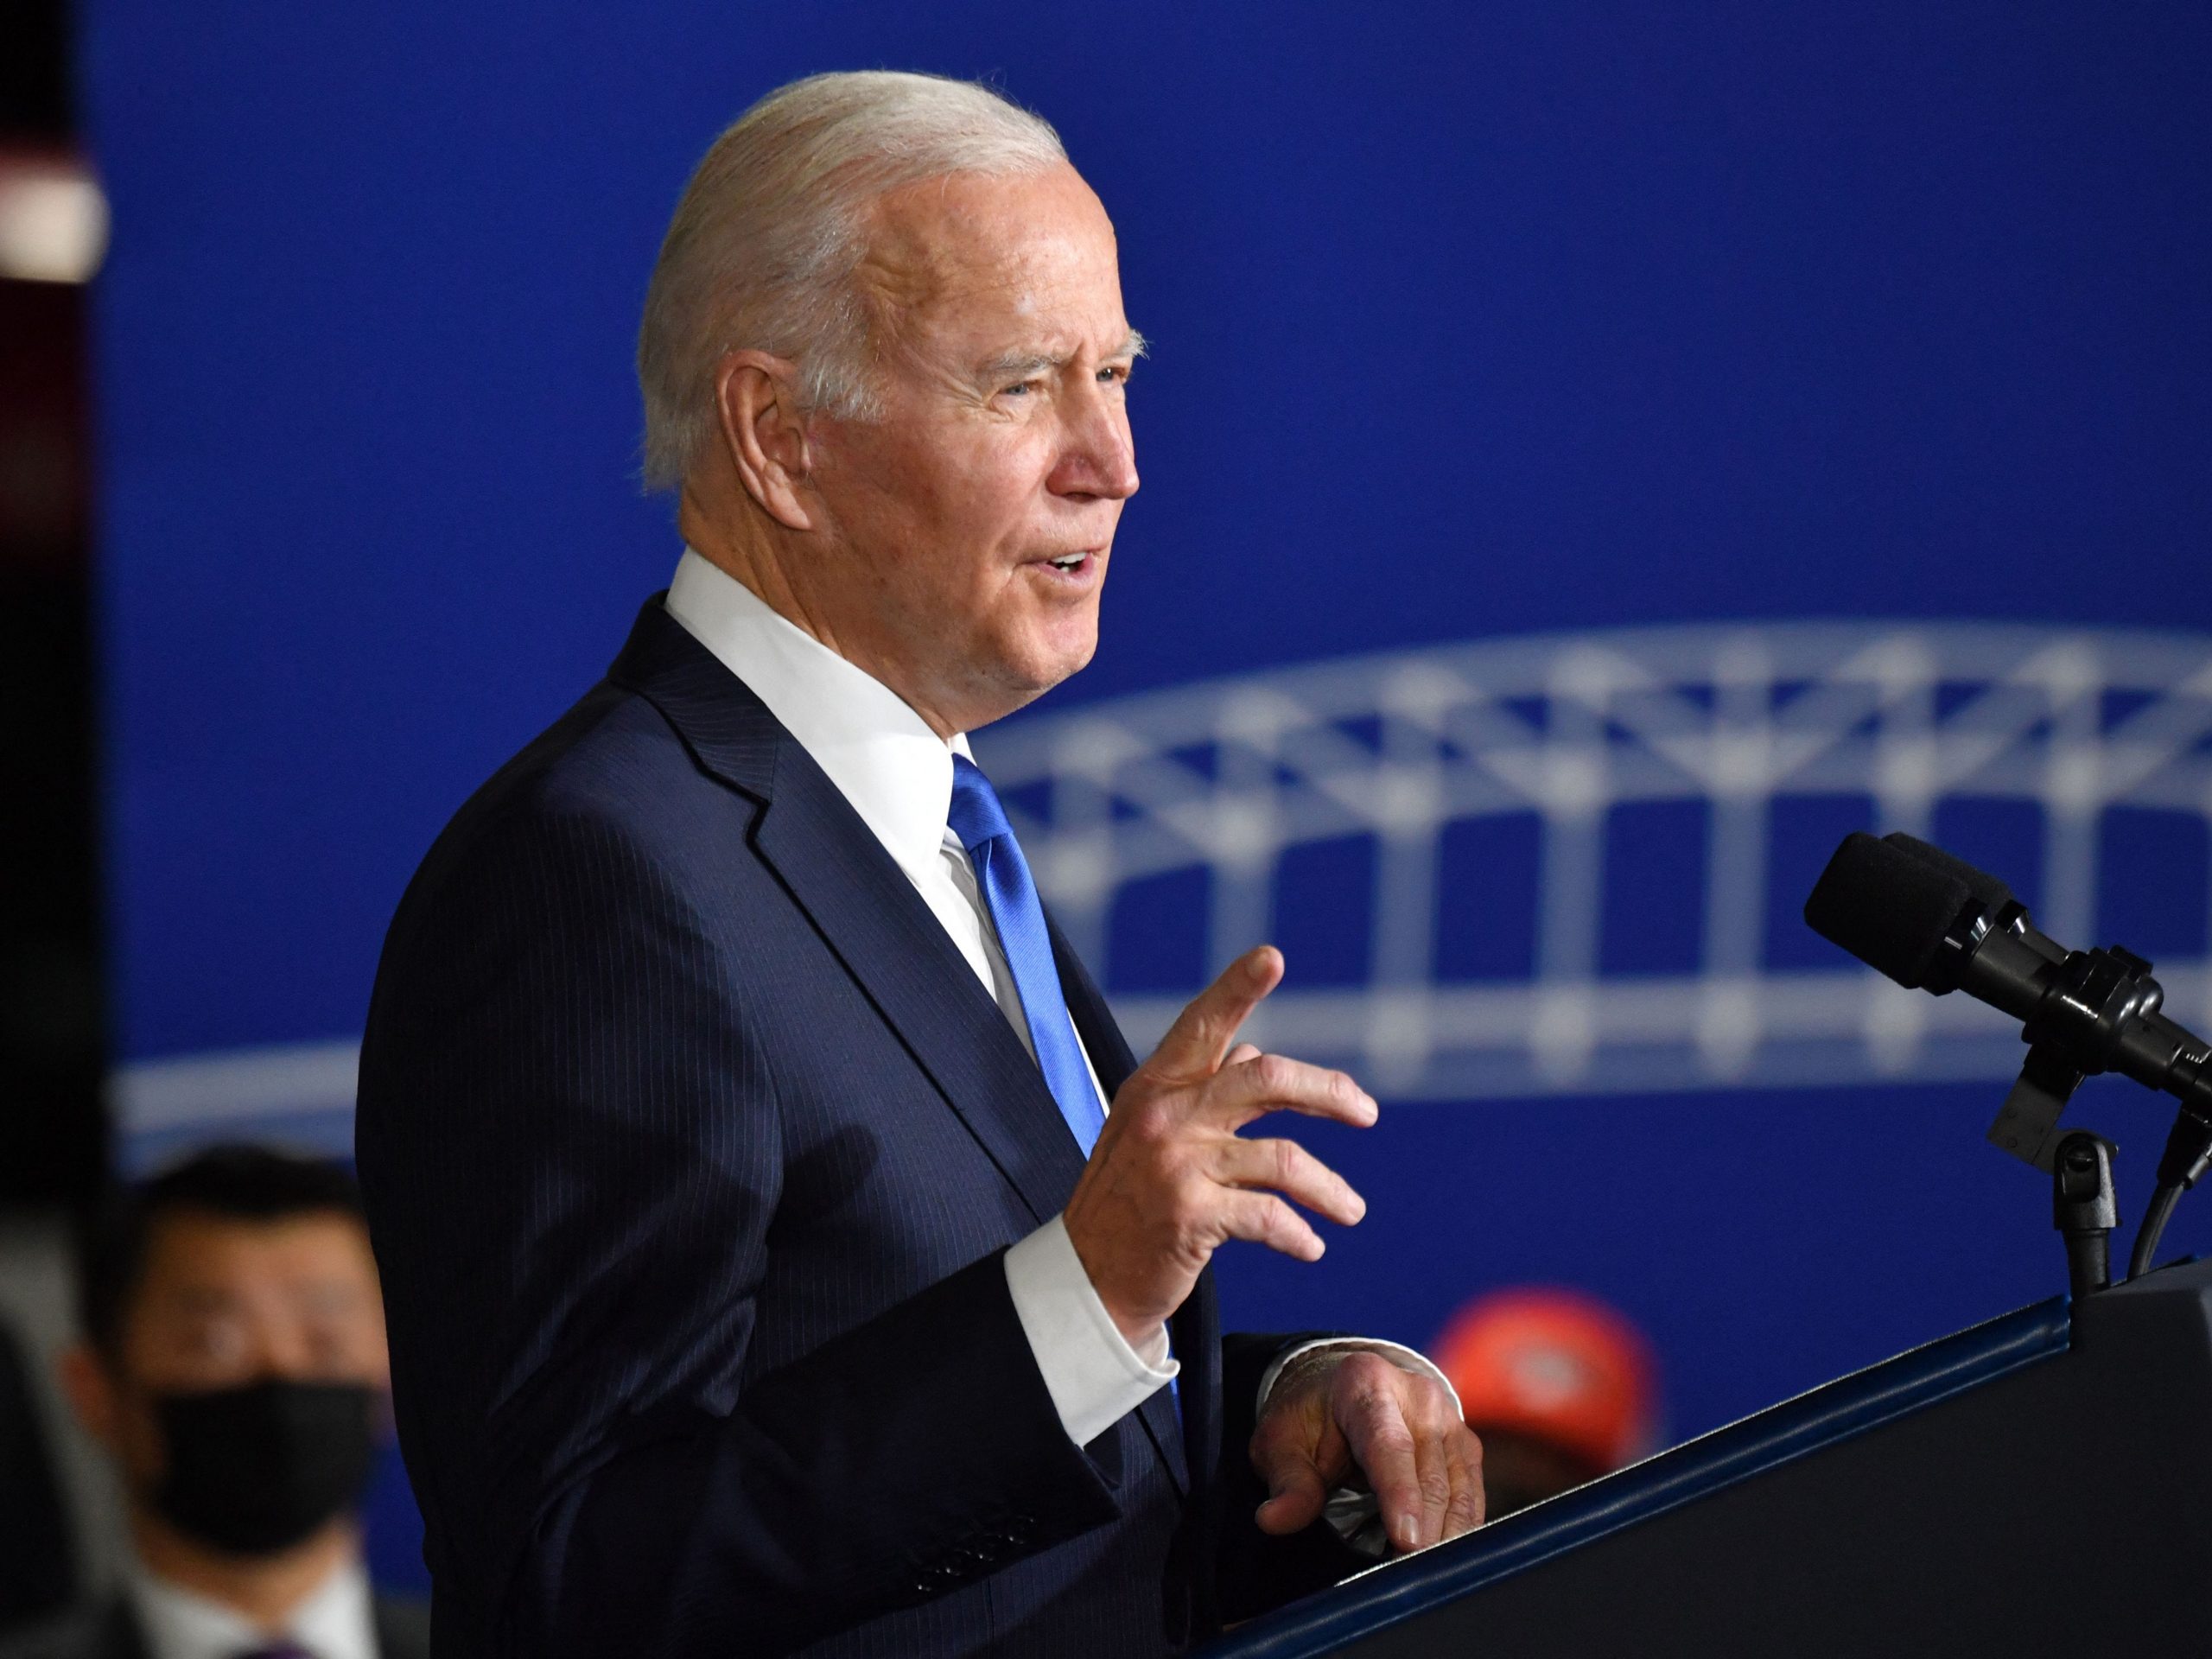 US President Joe Biden speaks about the Infrastructure Law while visiting the Kansas City Area Transportation Authority in Missouri on December 8, 2021. (